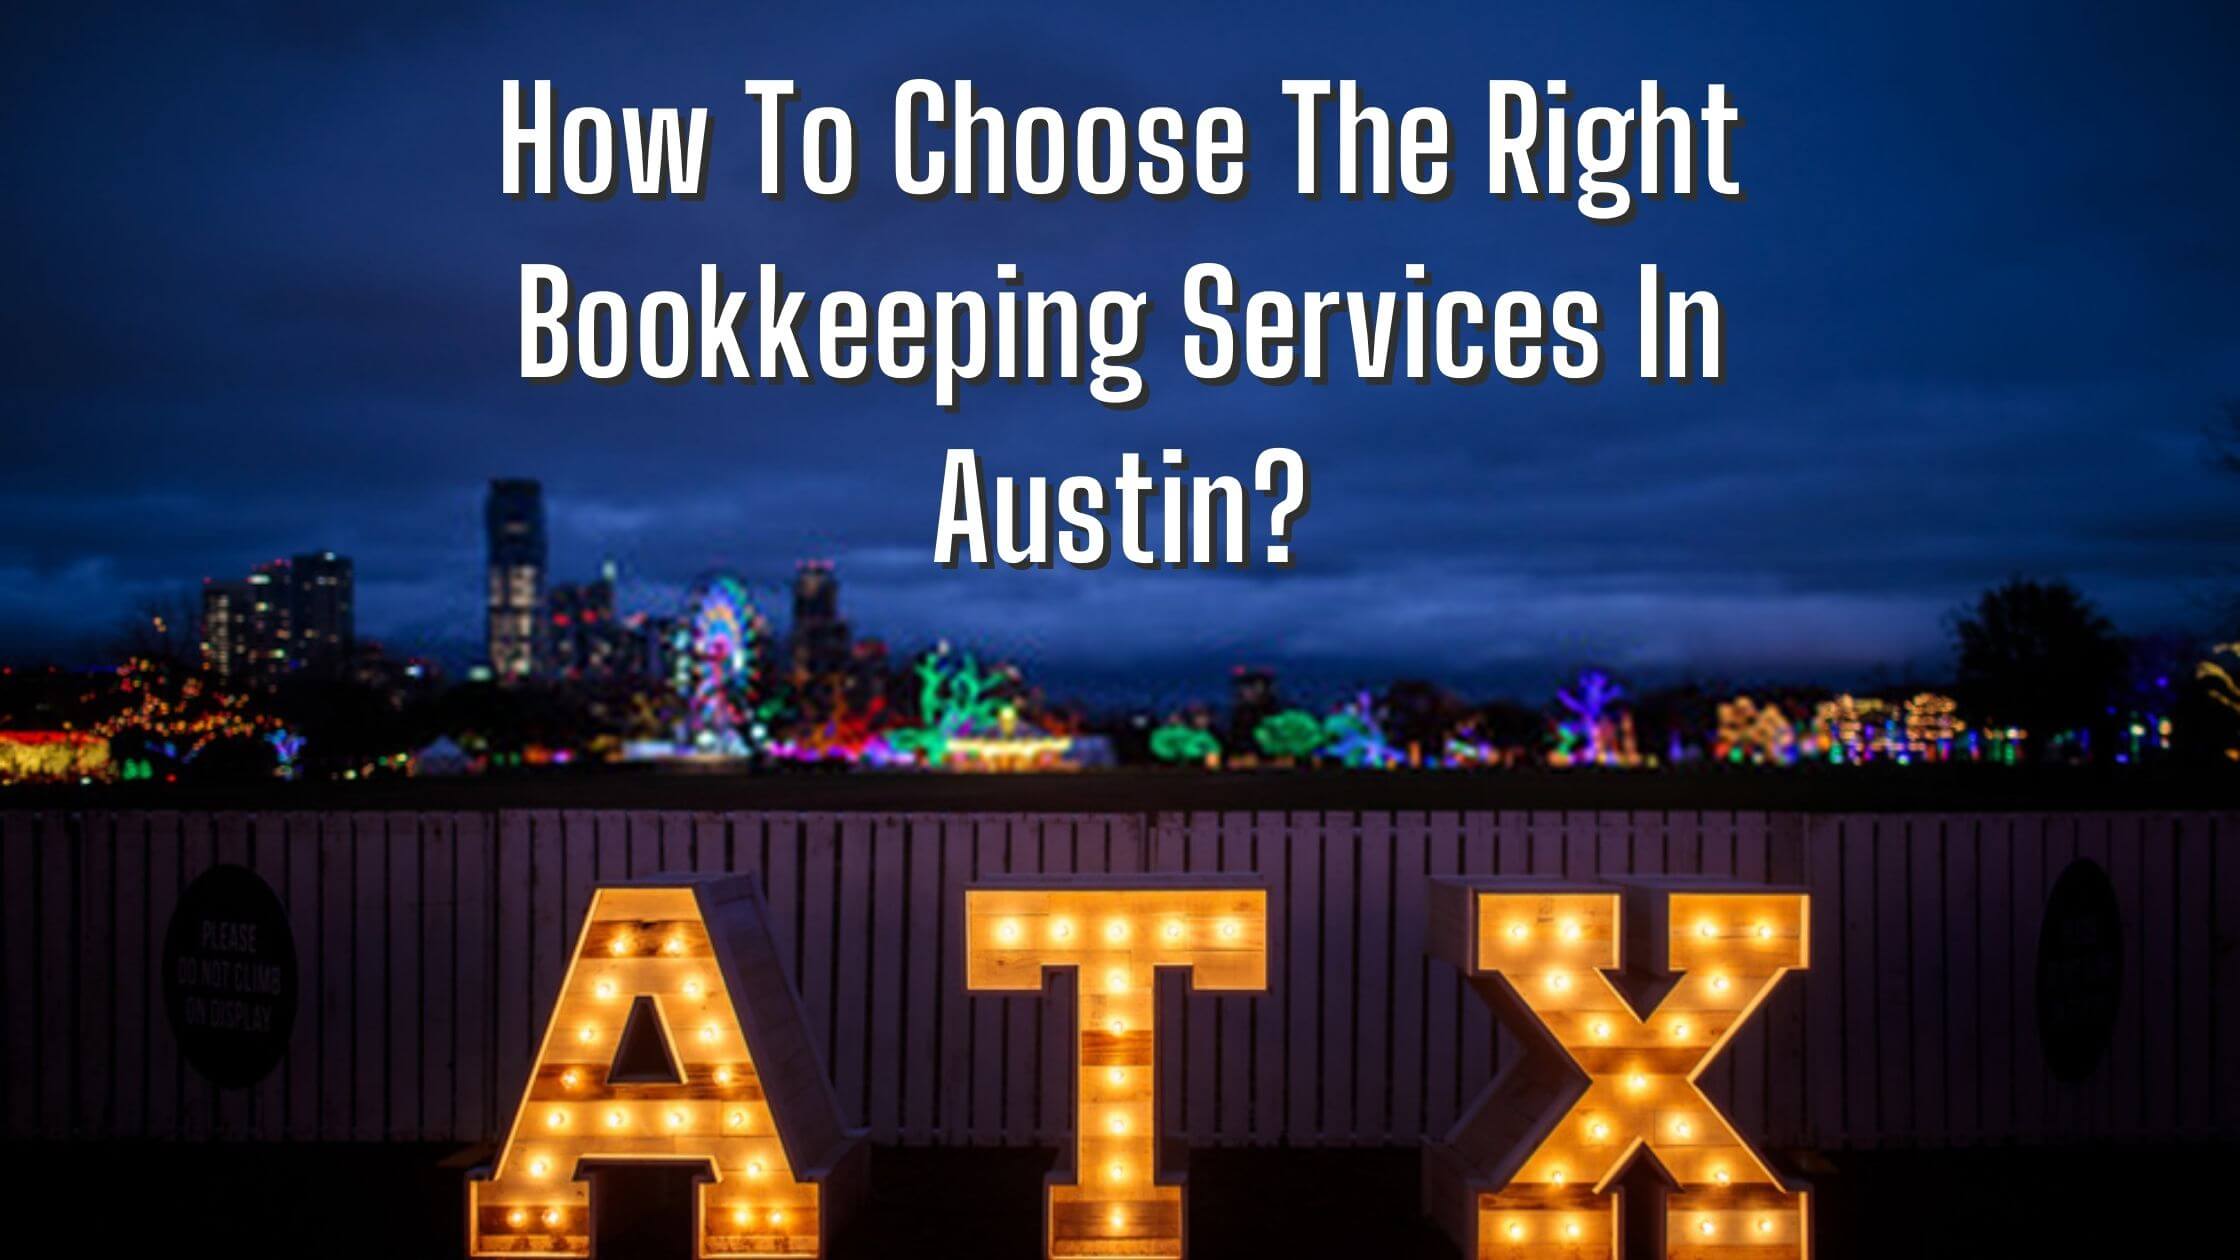 Online bookkeeping services In Austin